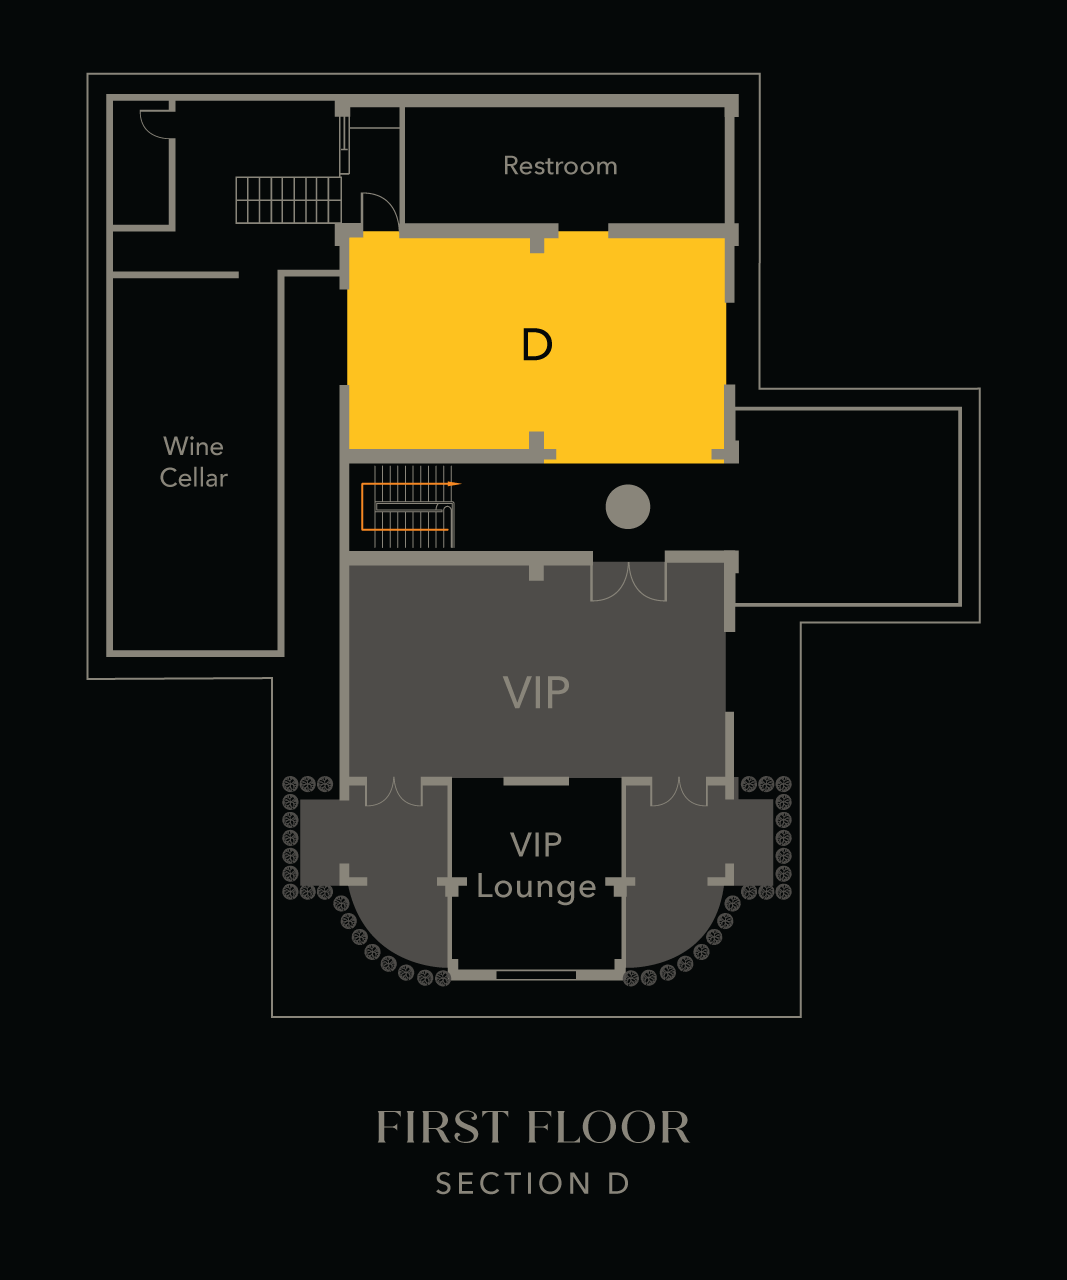 Section D - First Floor